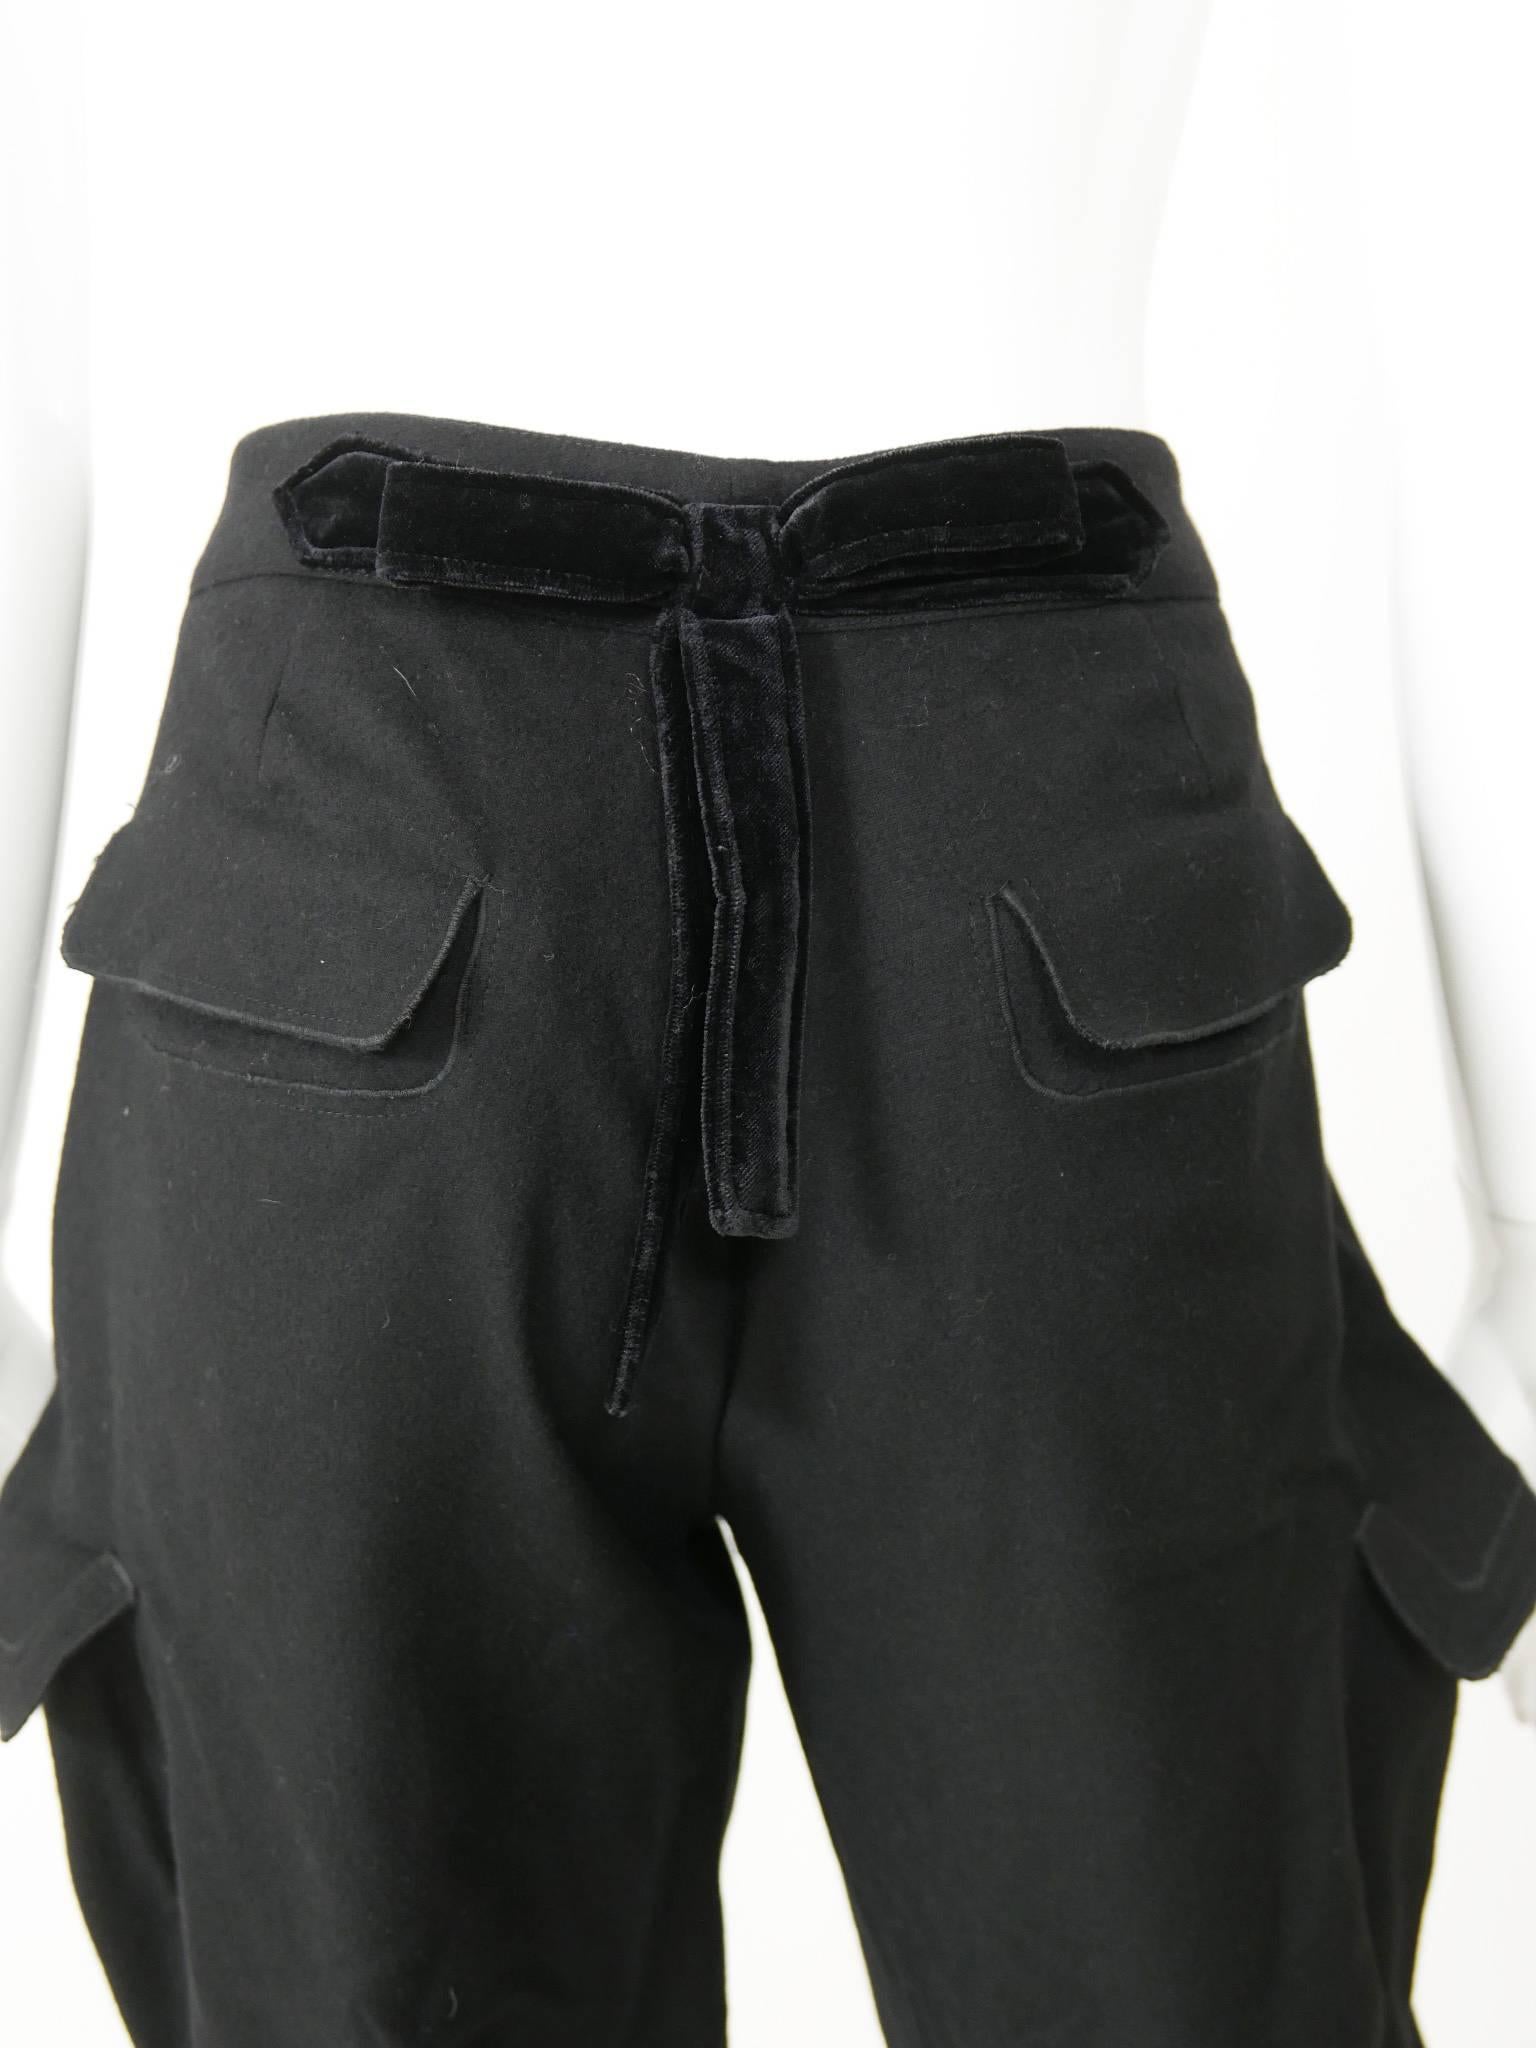 Yves Saint Laurent Rive Gauche Knickerbockers Gaucho Trouser Pants In Excellent Condition In Milan, Italy